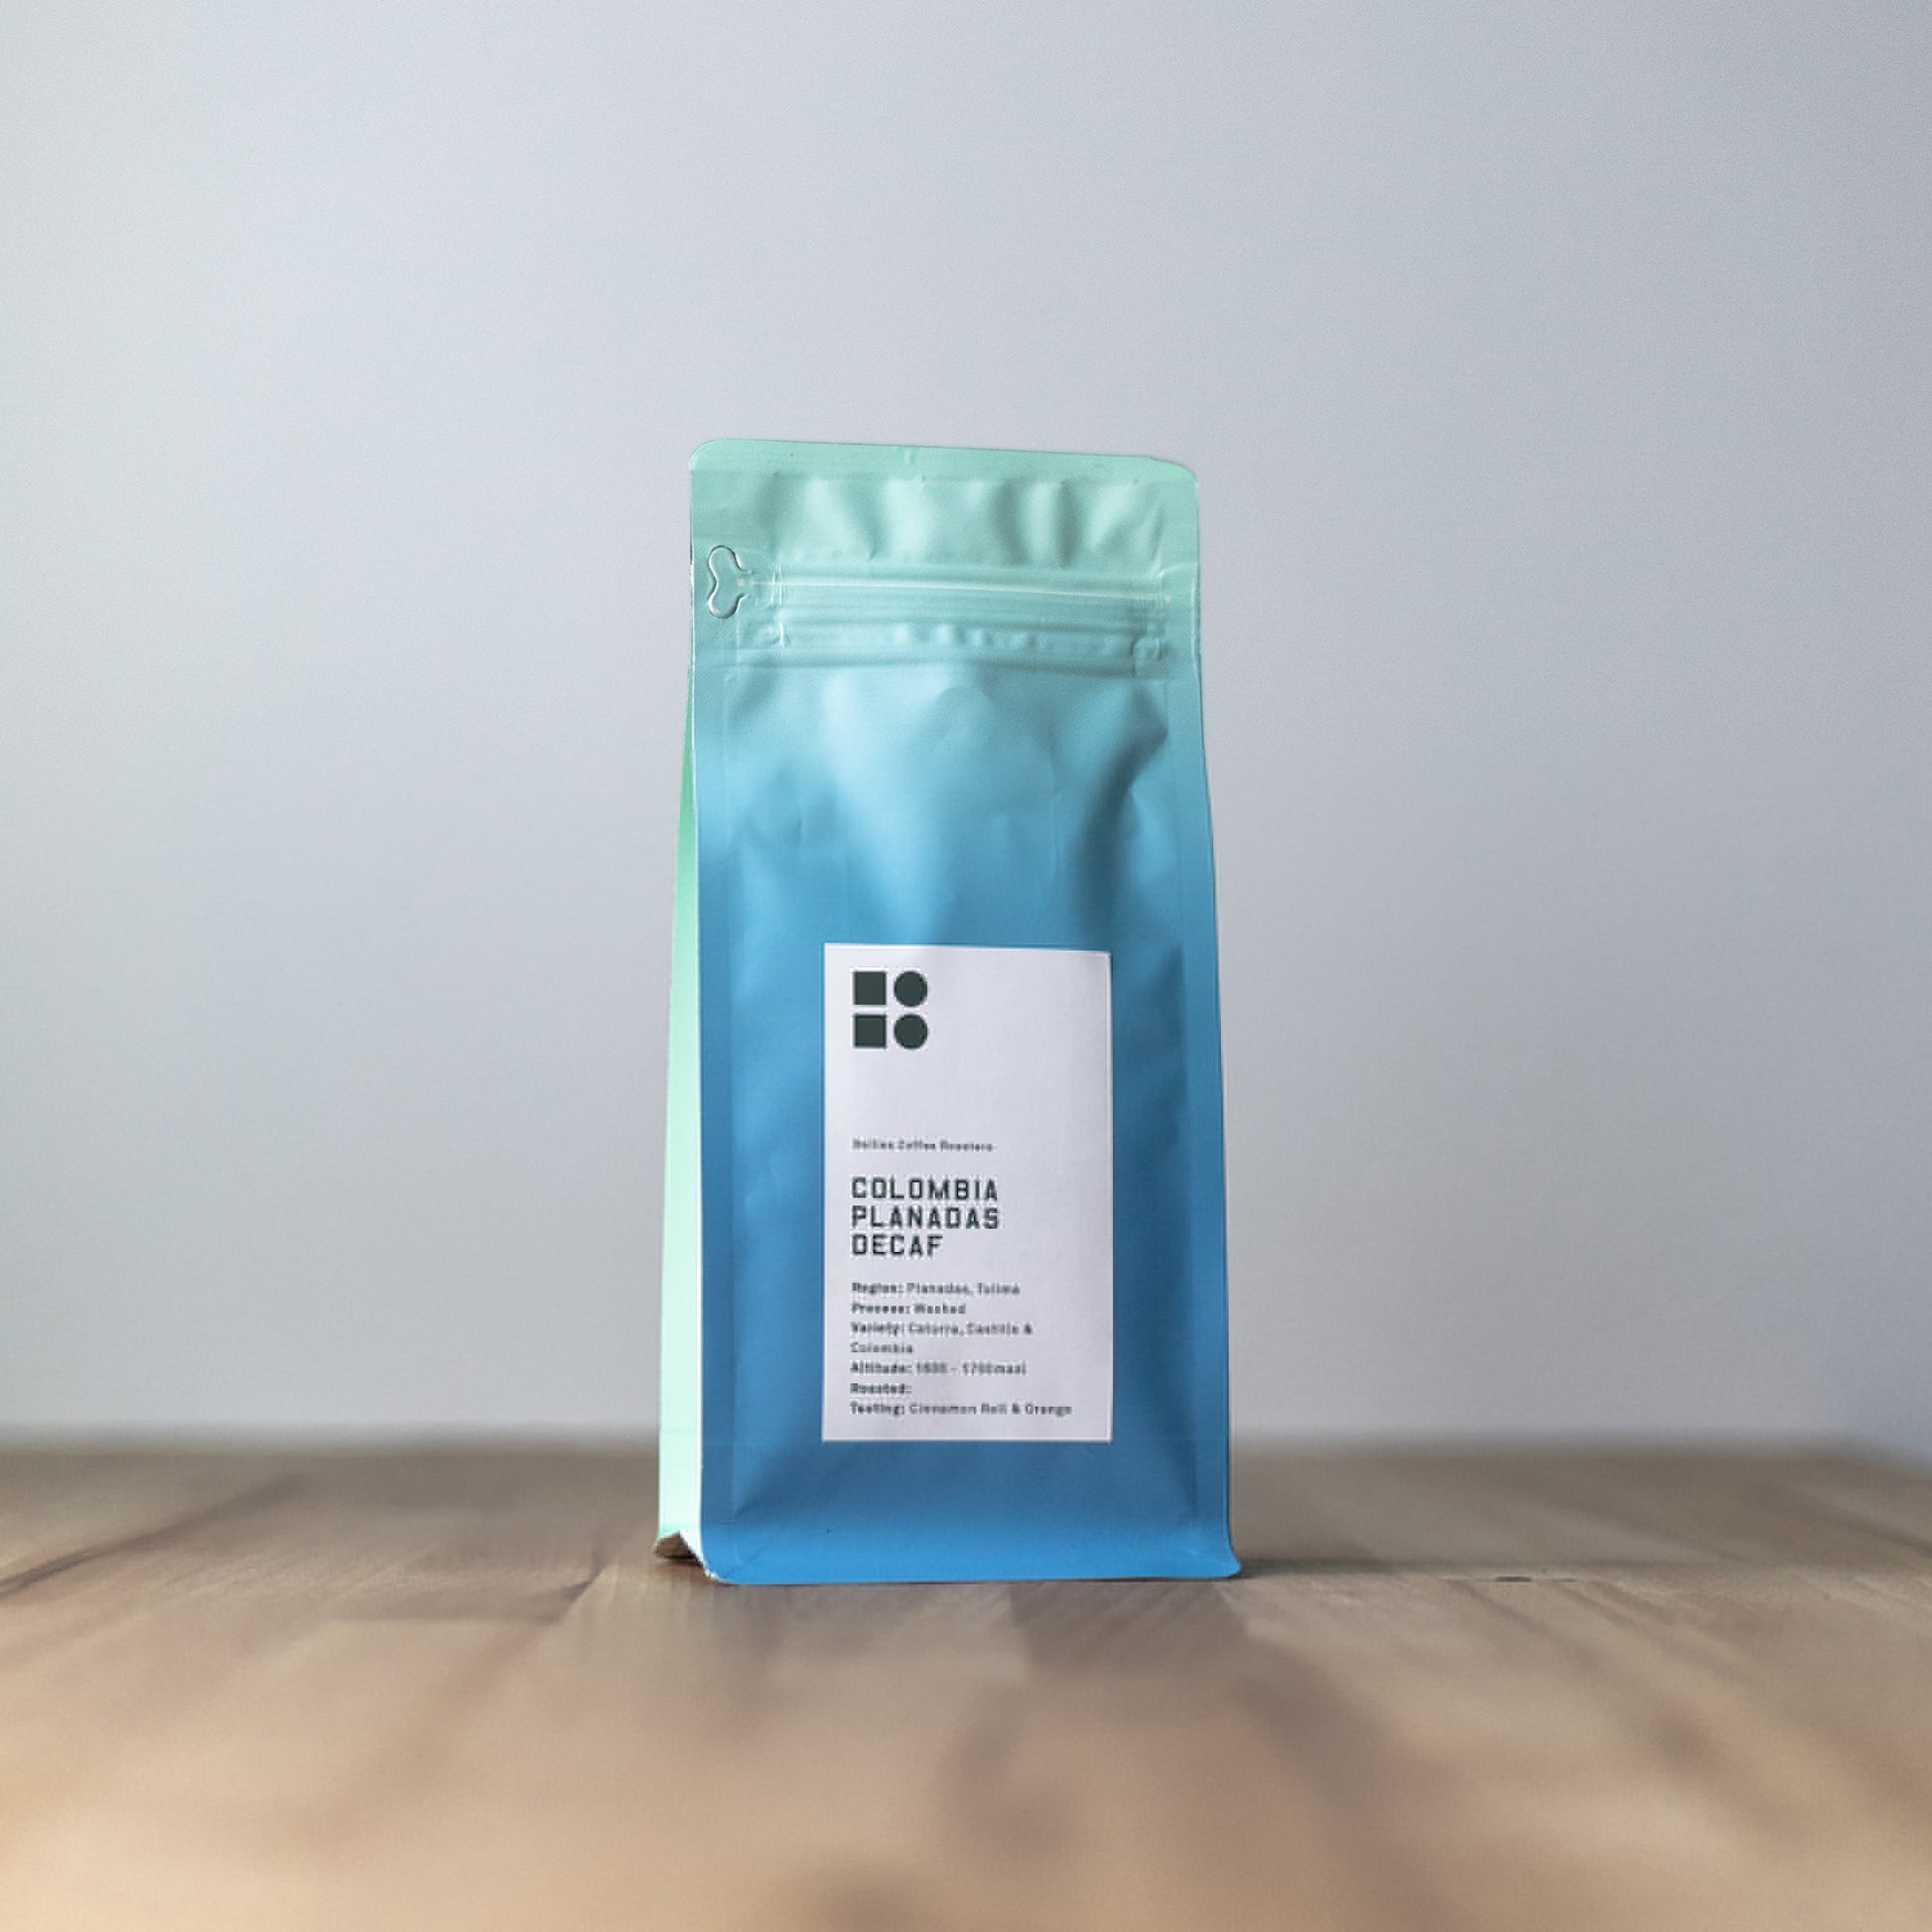 Decaf Colombia Planadas Tolima Washed - Bailies Coffee Roasters, Coffee beans, roasted in Belfast, local roastery creating speciality coffee, blue bag, white label, colombia